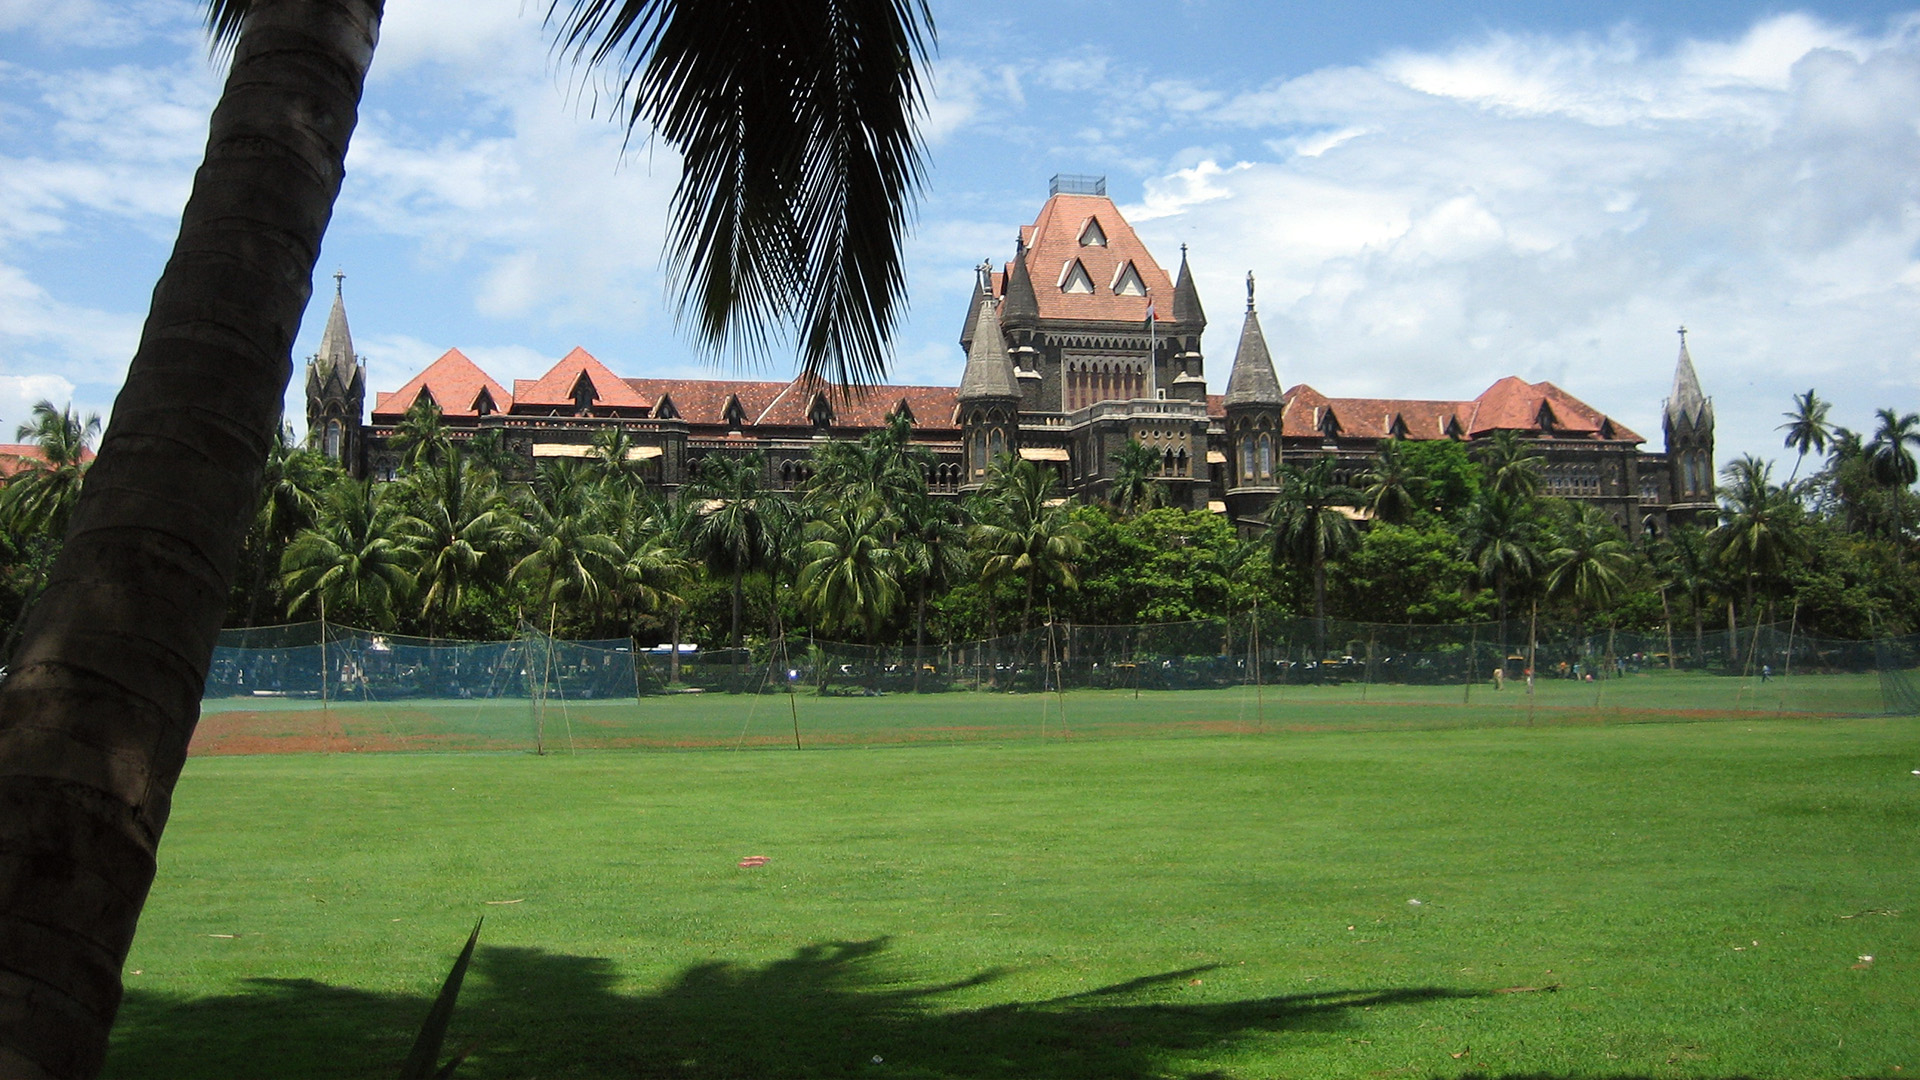 Bombay_-_The_High_Court_from_afar_2006-smaller-maybe.jpg